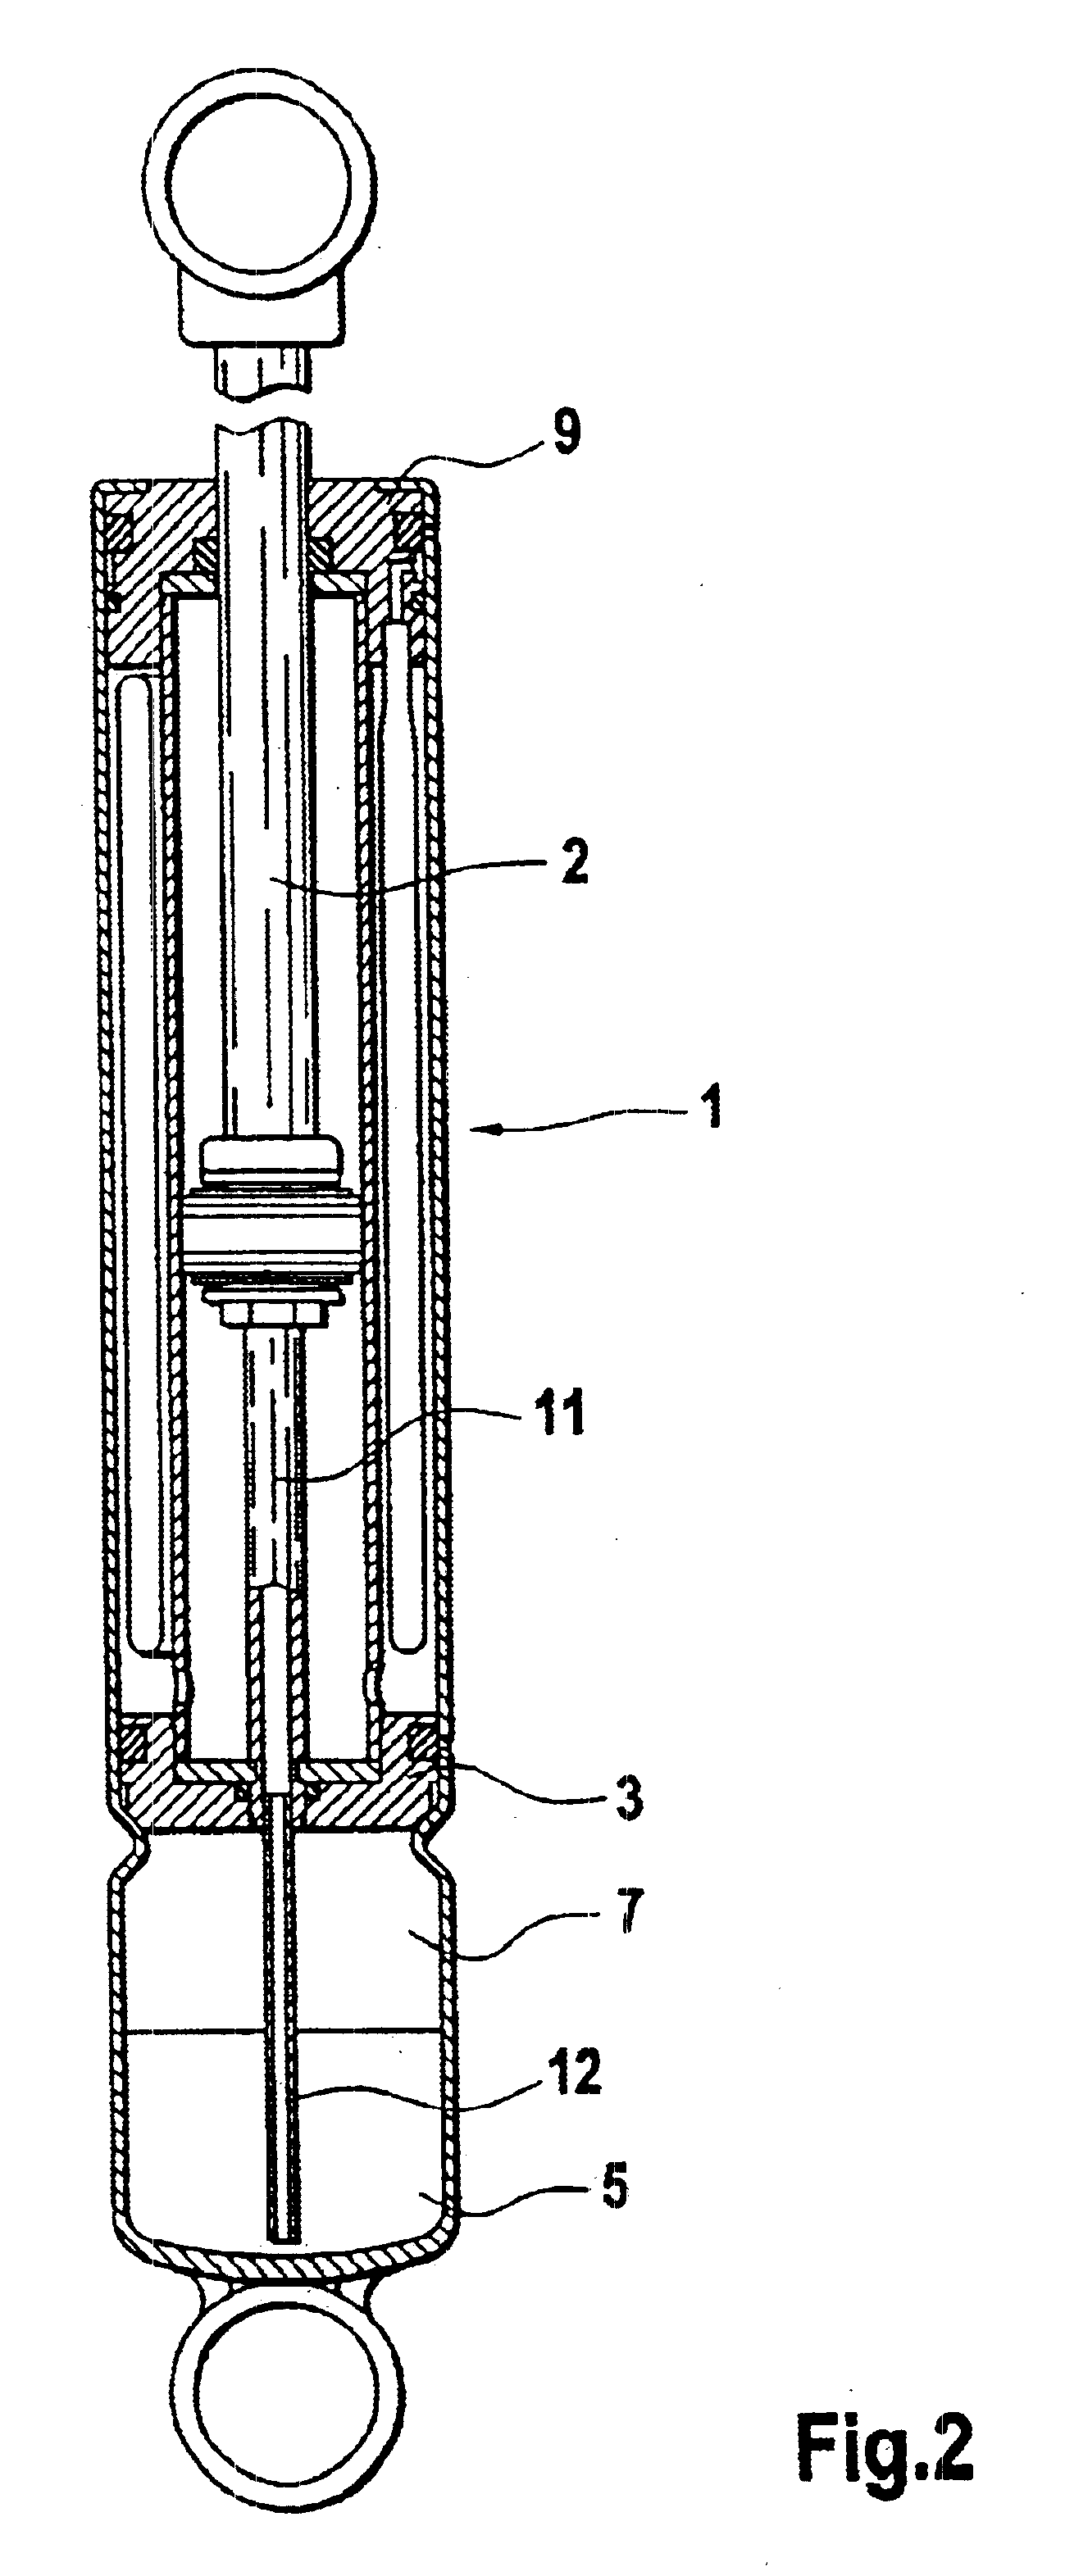 Self-pumping hydropneumatic suspension strut with internal ride-height control